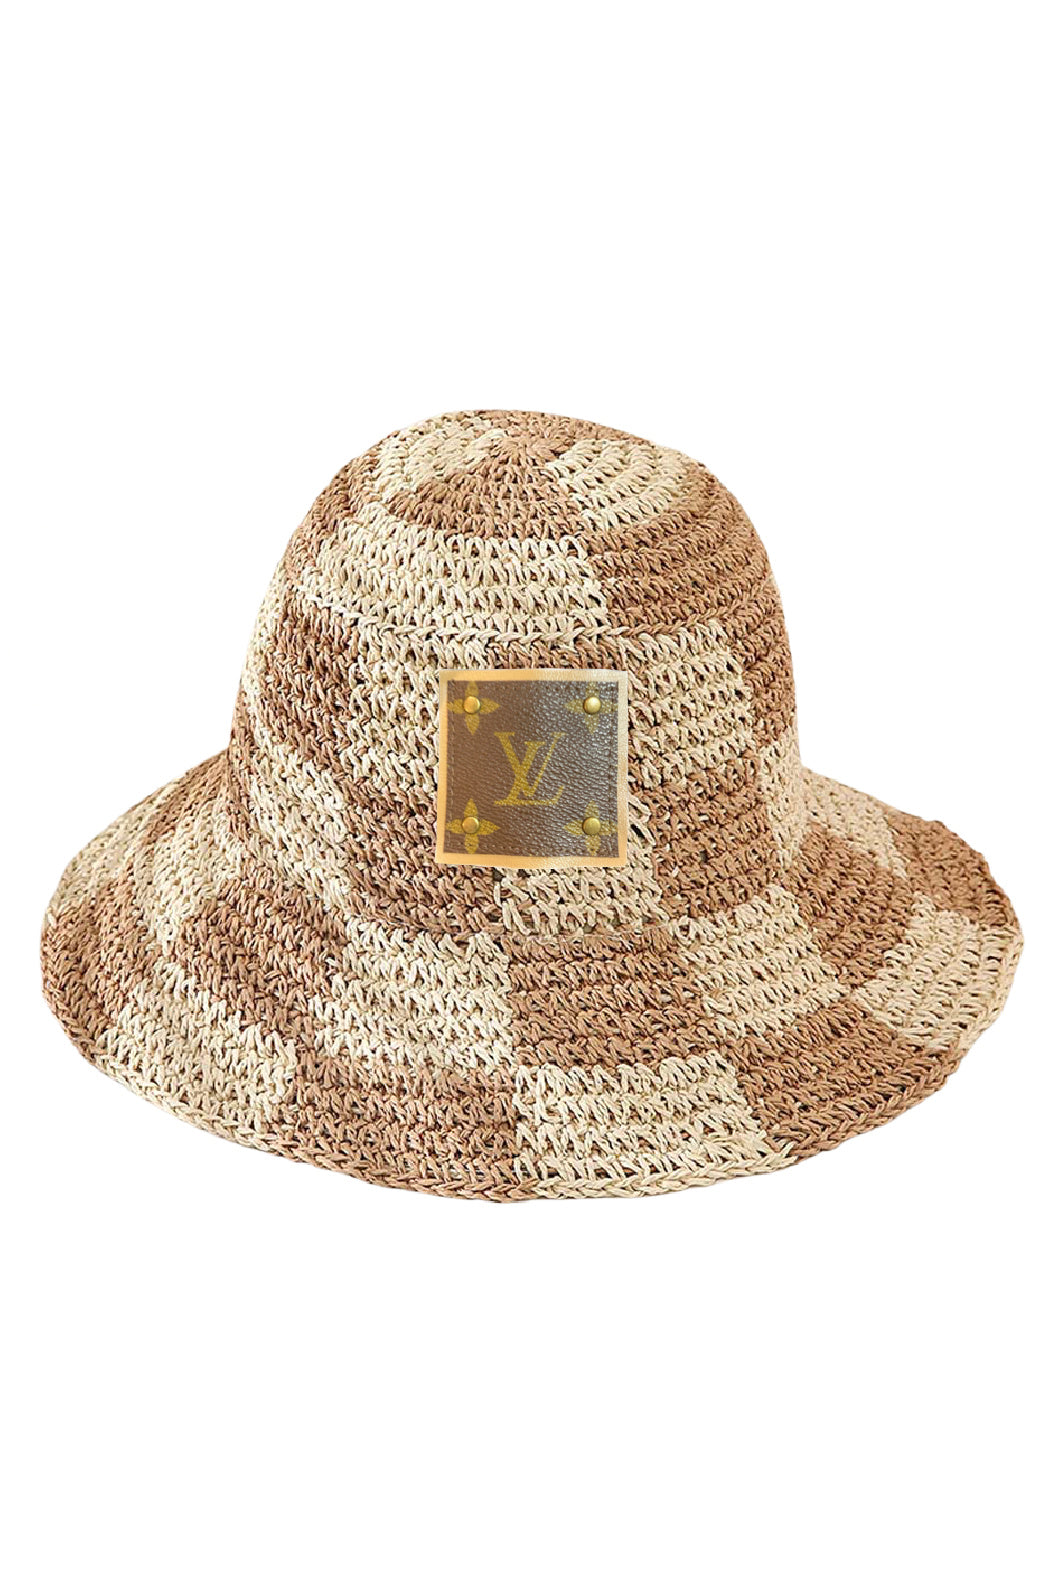 Upcycled LV Straw Checkerboard Bucket Hat